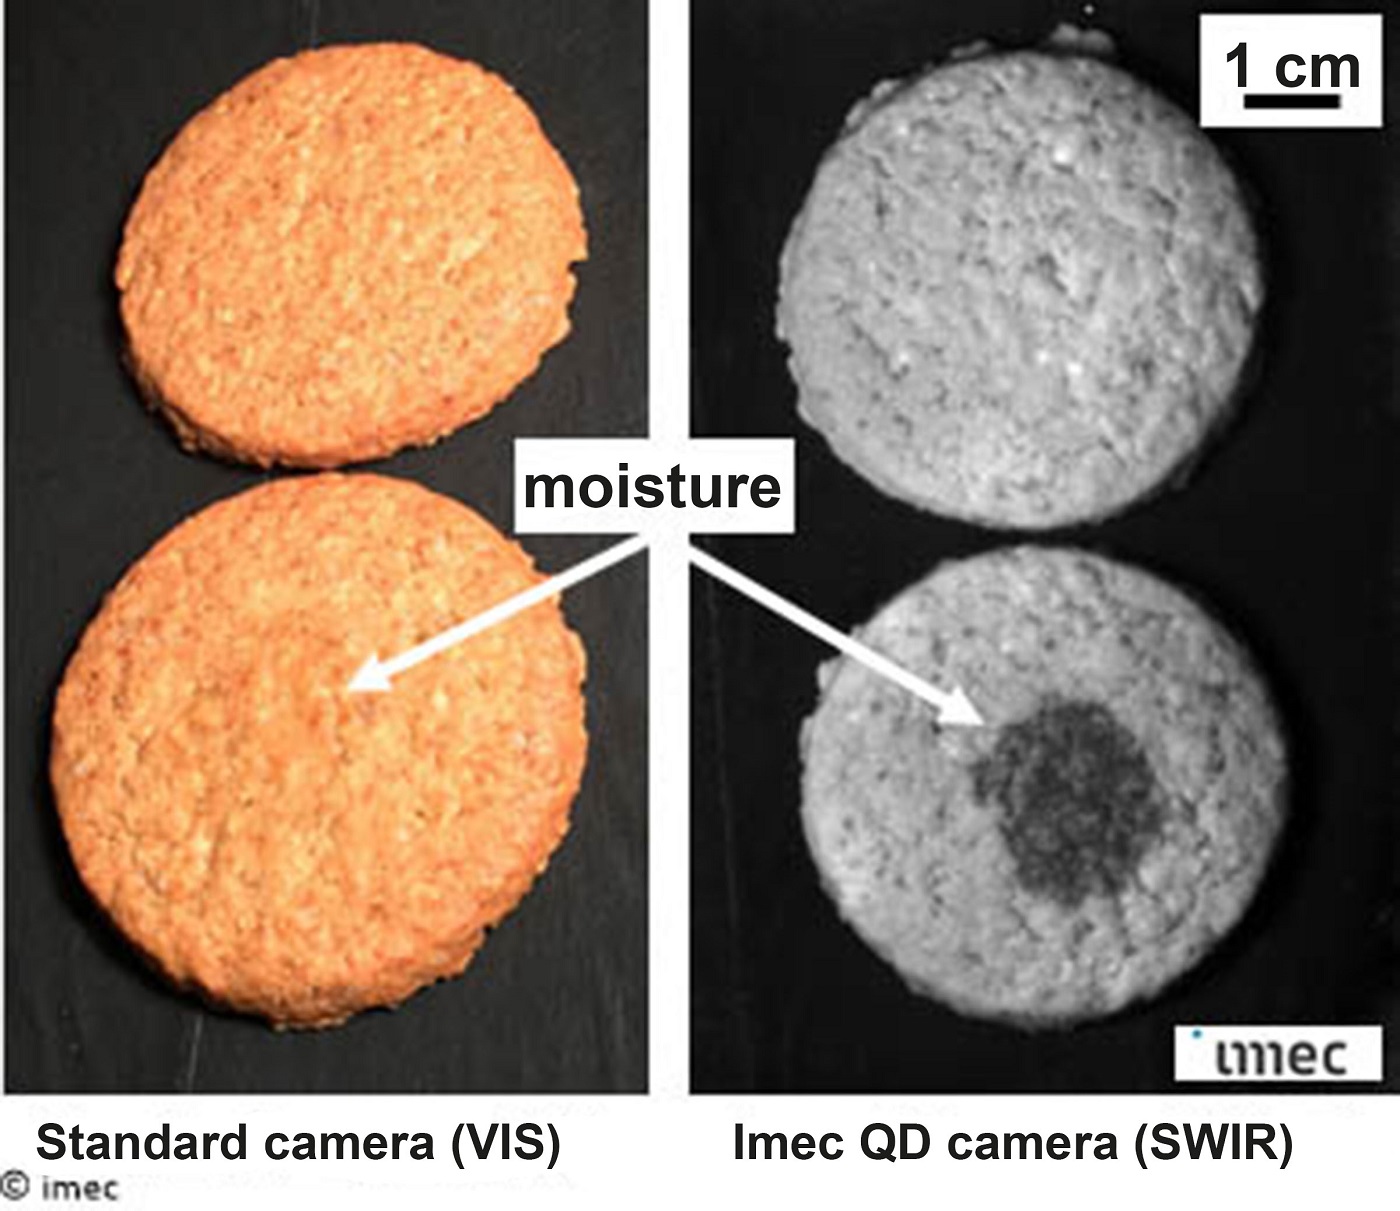 Test images of cookies acquired with a standard Si-based camera in visible range and imec QD-based camera at the wavelength of 1450nm